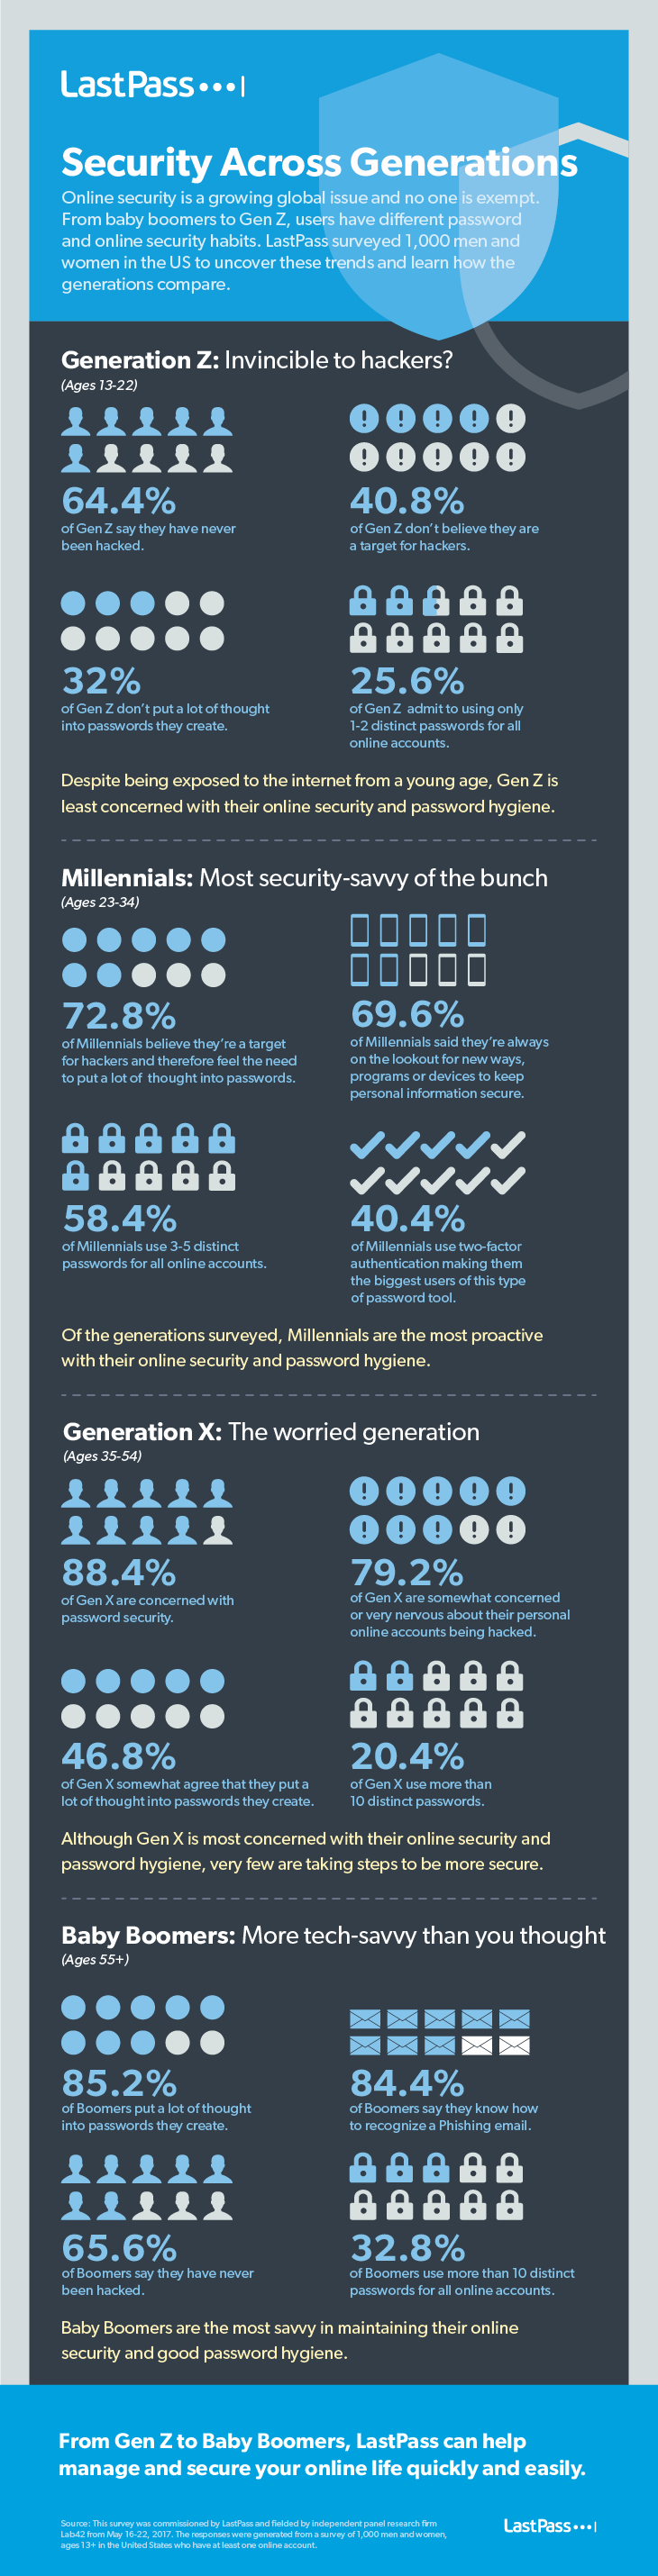 Security Across Generations - #infographic